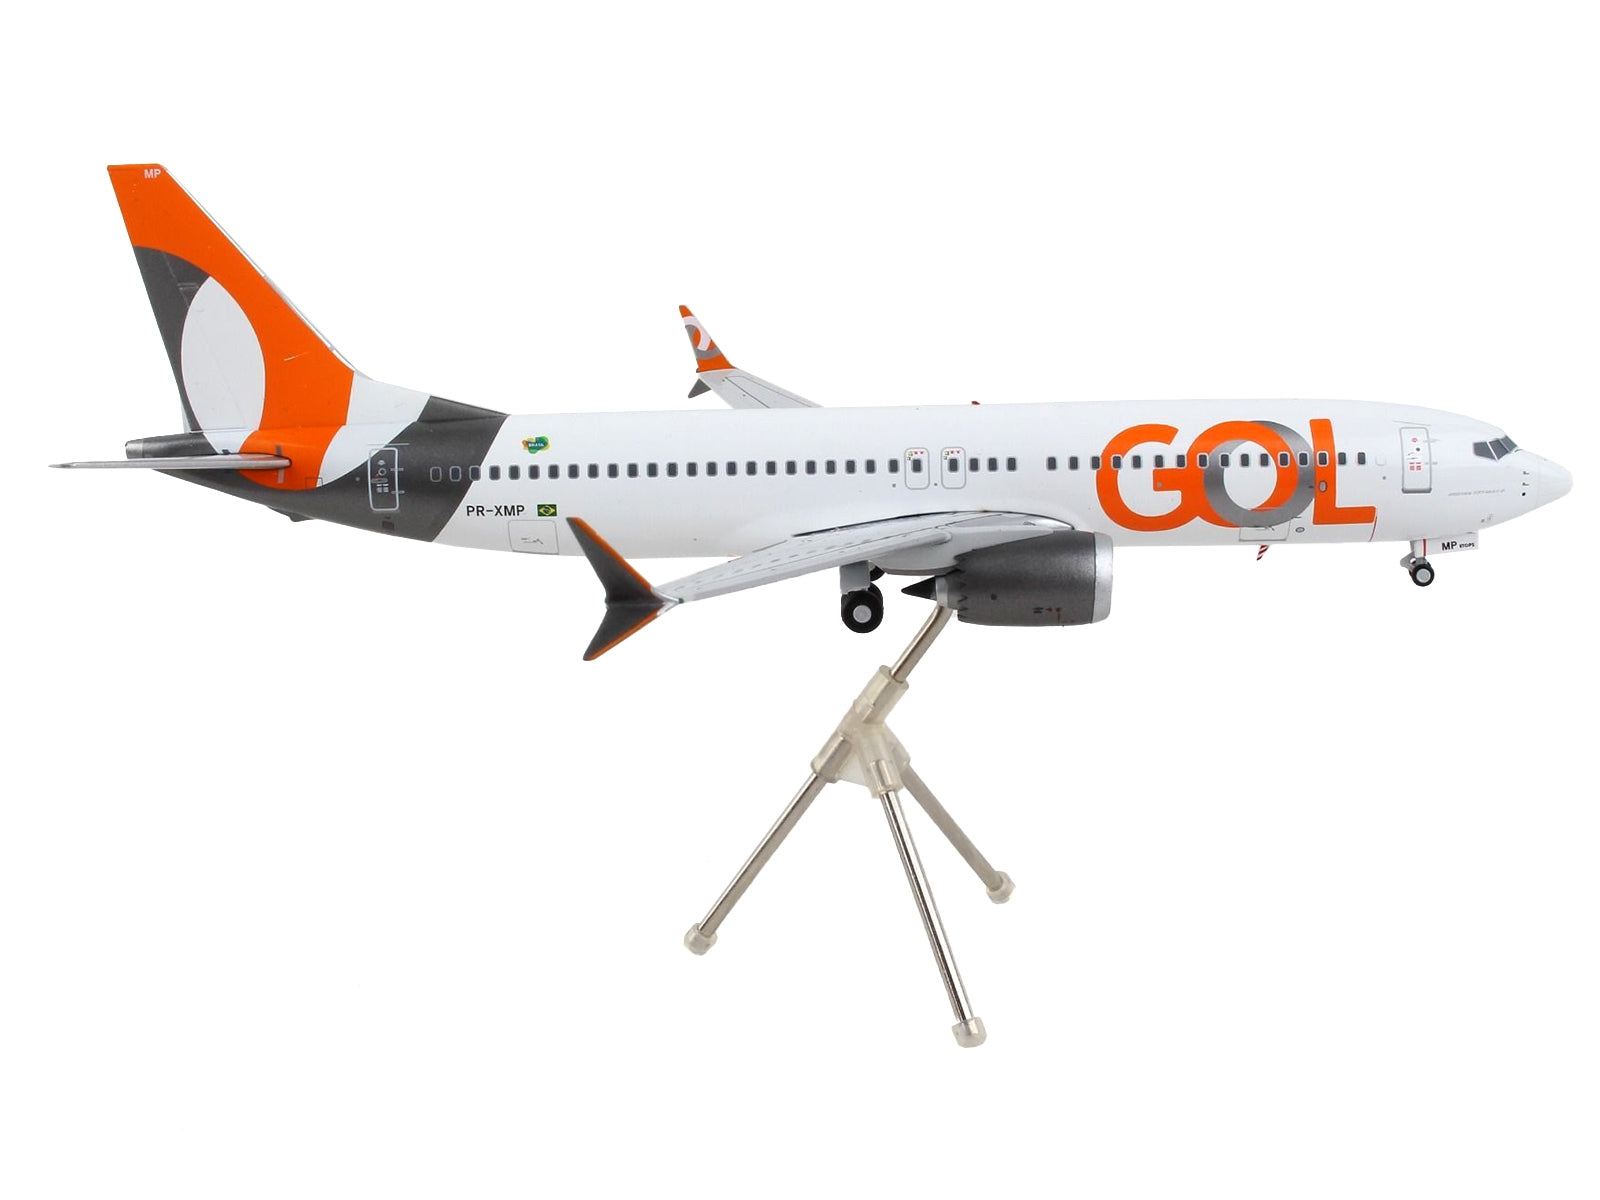 Boeing 737 MAX 8 Commercial Aircraft "Gol Linhas Aereas Inteligentes" White with Orange Tail